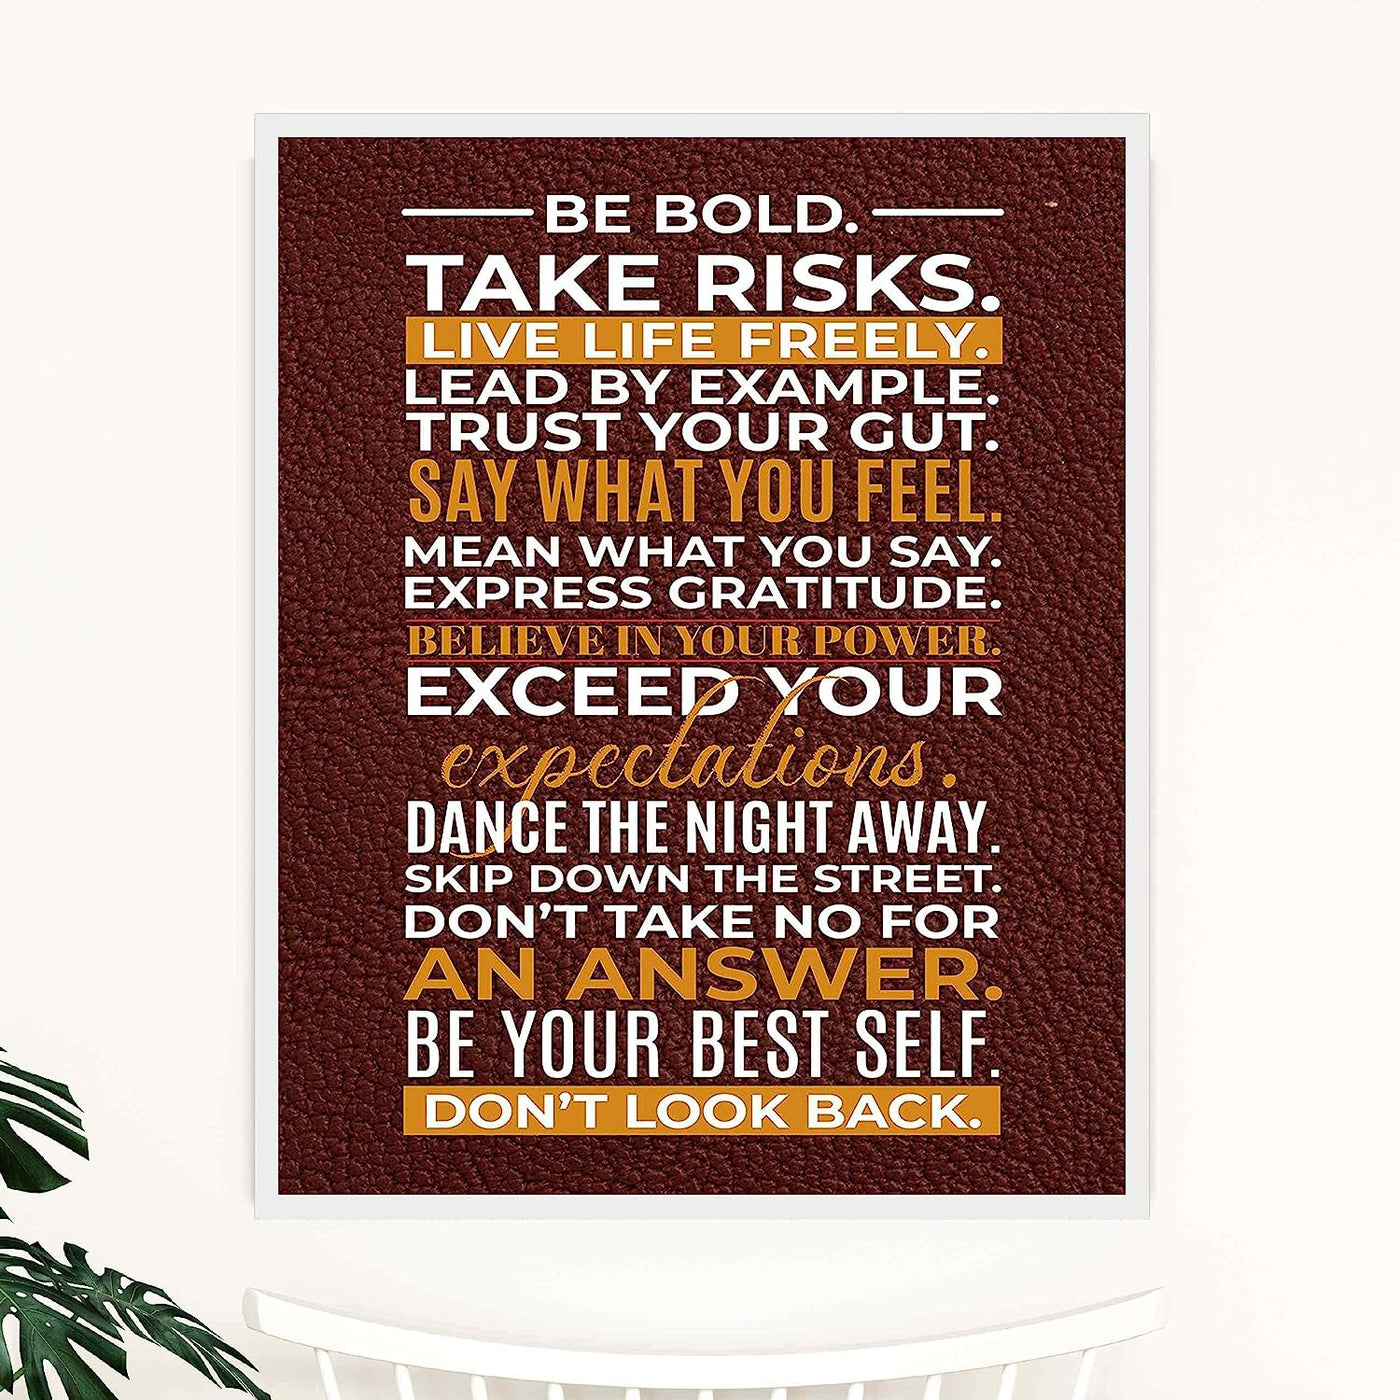 Be Bold-Take Risks-Live Life Freely- Motivational Quotes Wall Art Sign - 11 x 14" Inspirational Typographic Print-Ready to Frame. Home-Office-School-Gym-Dorm Decor. Great Reminders for Motivation!